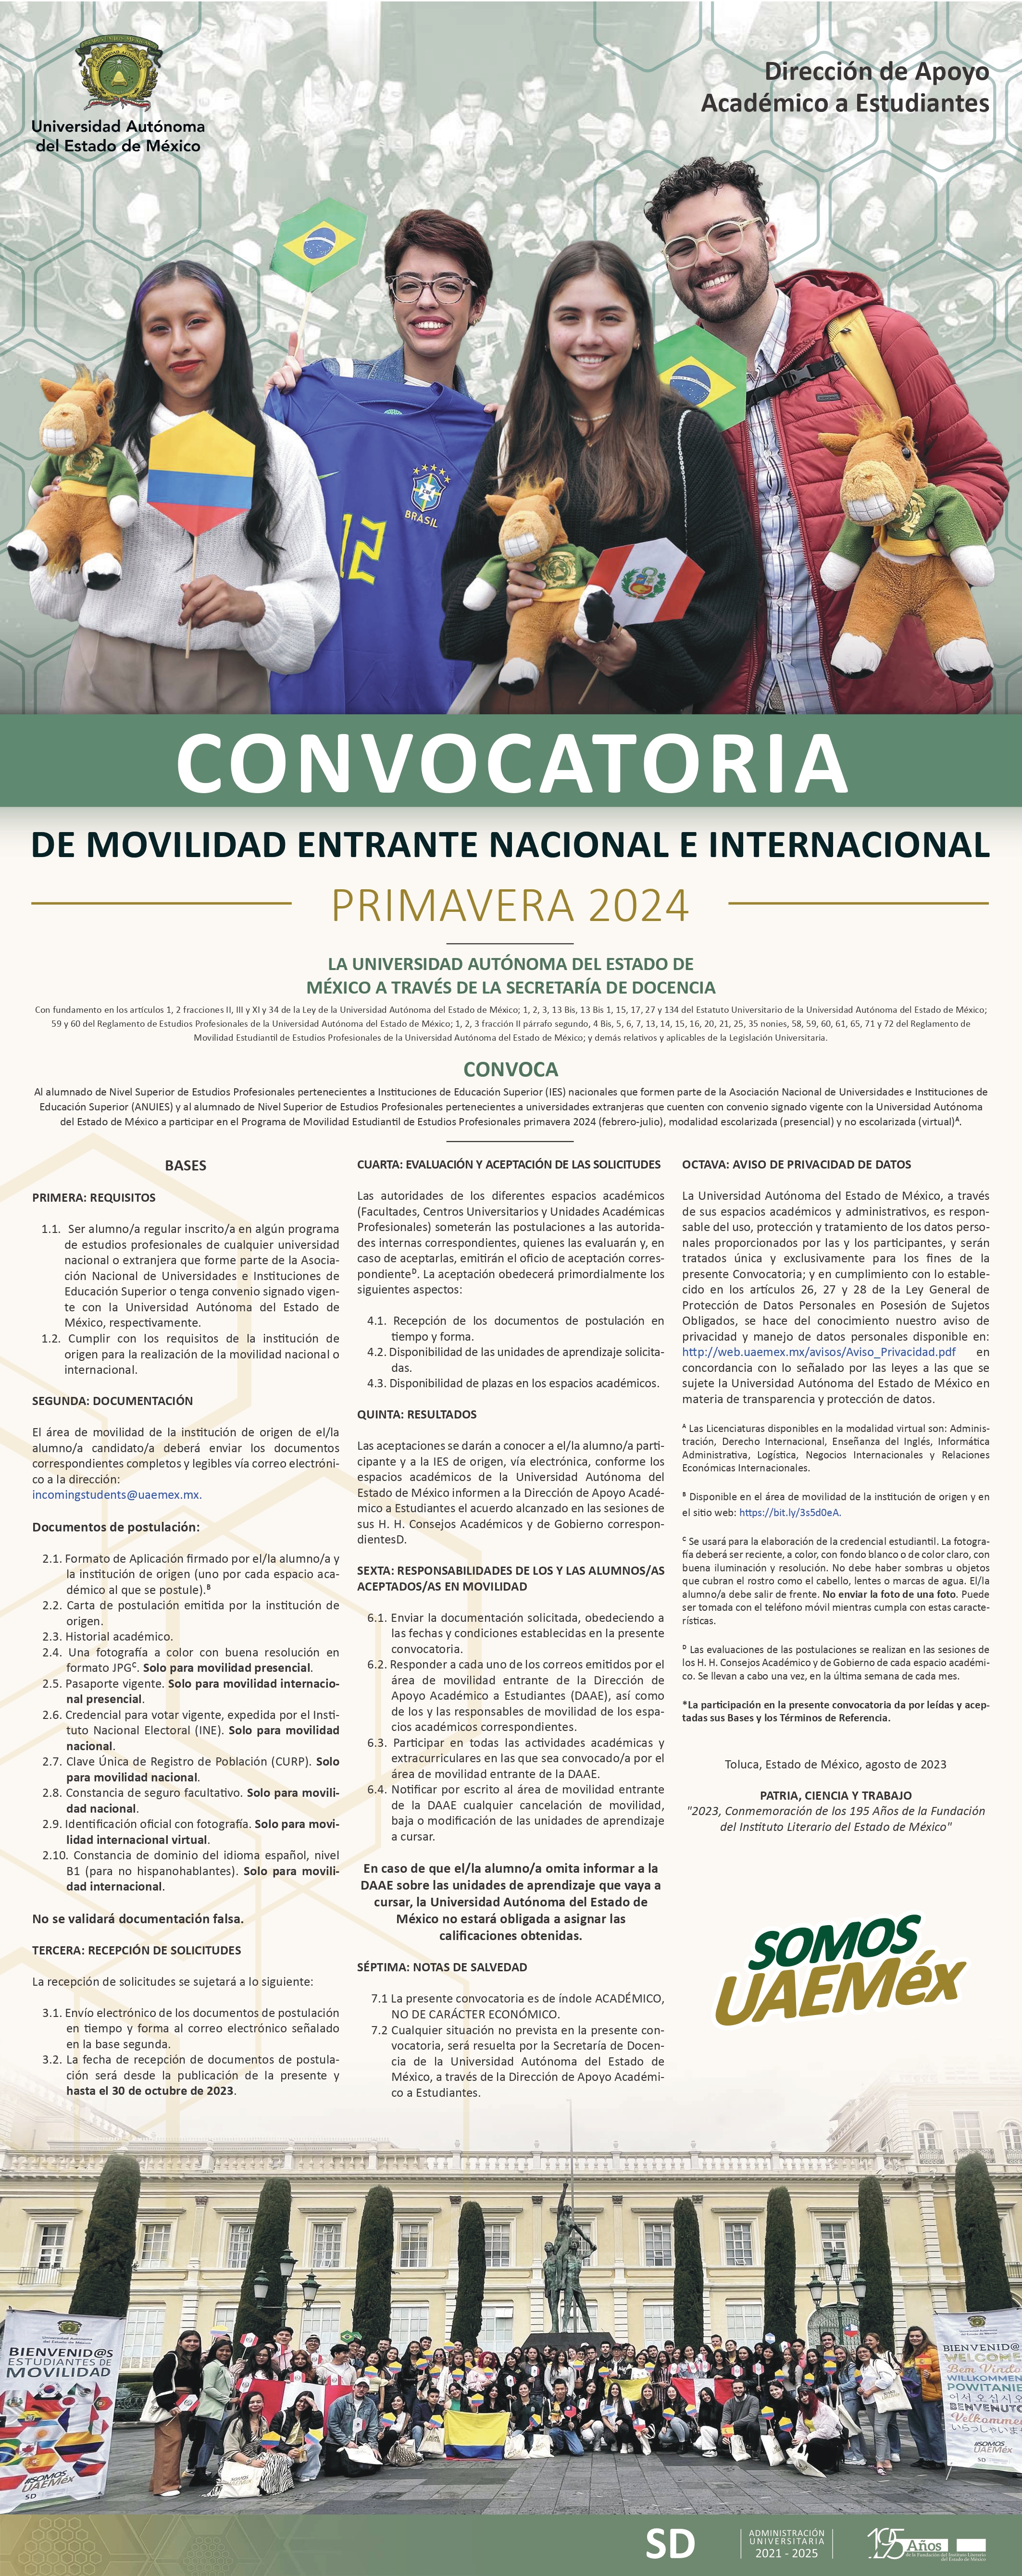 Convocatoria mov 24A_pages-to-jpg-0001